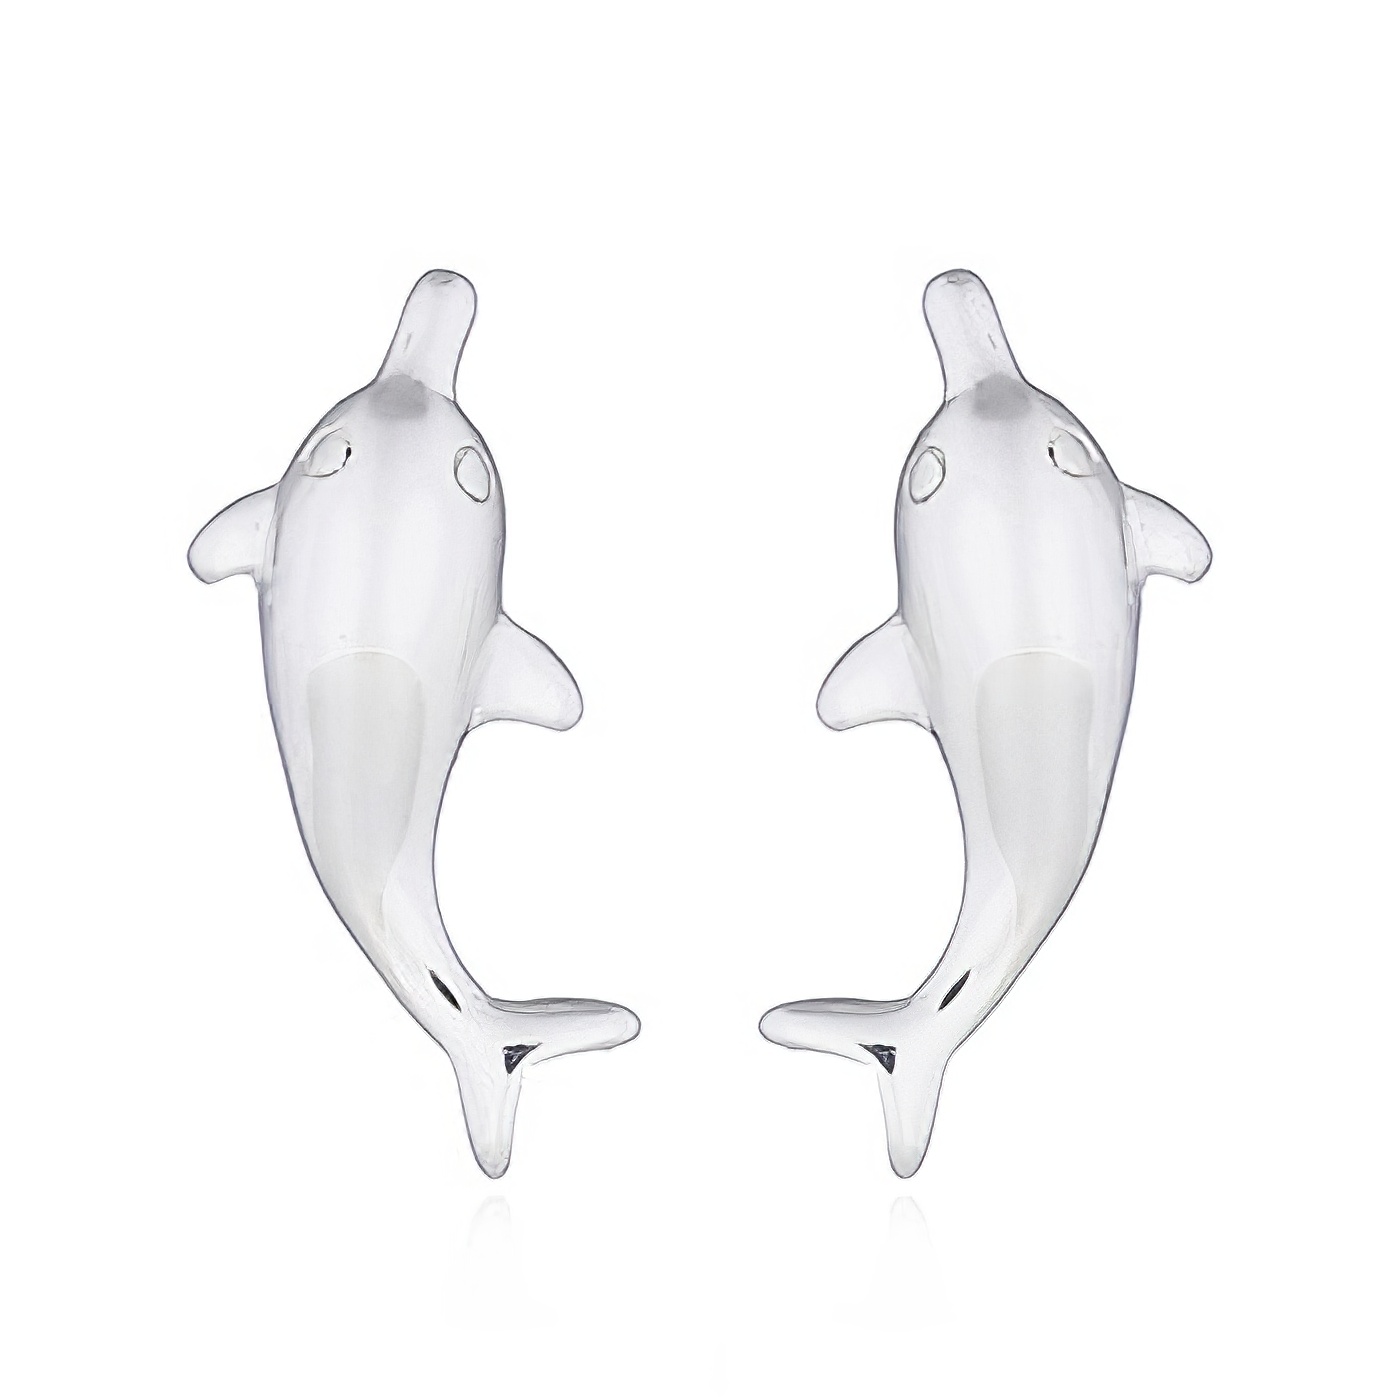 Charming Dolphin Silver Plated 925 Stud Earrings by BeYindi 